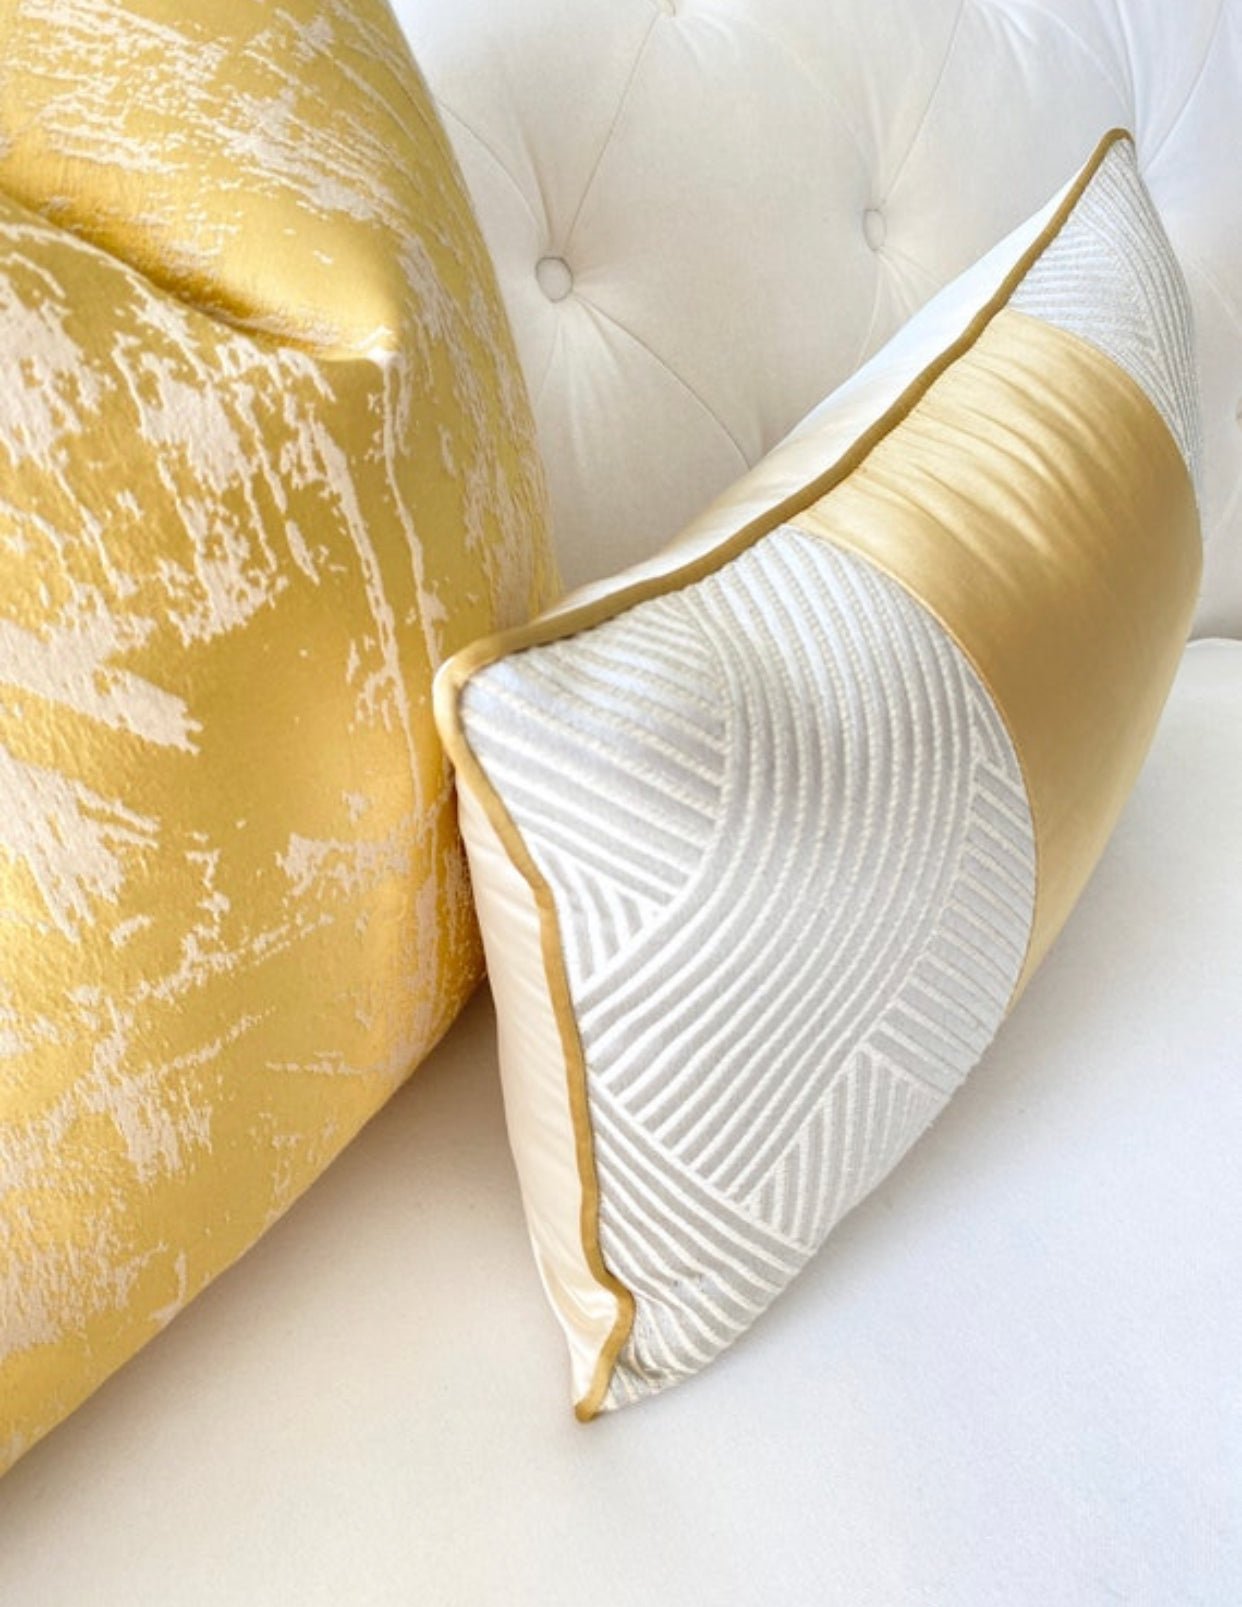 Gold Abstract Pillow Cover 22x22 - HTS HOME DECOR